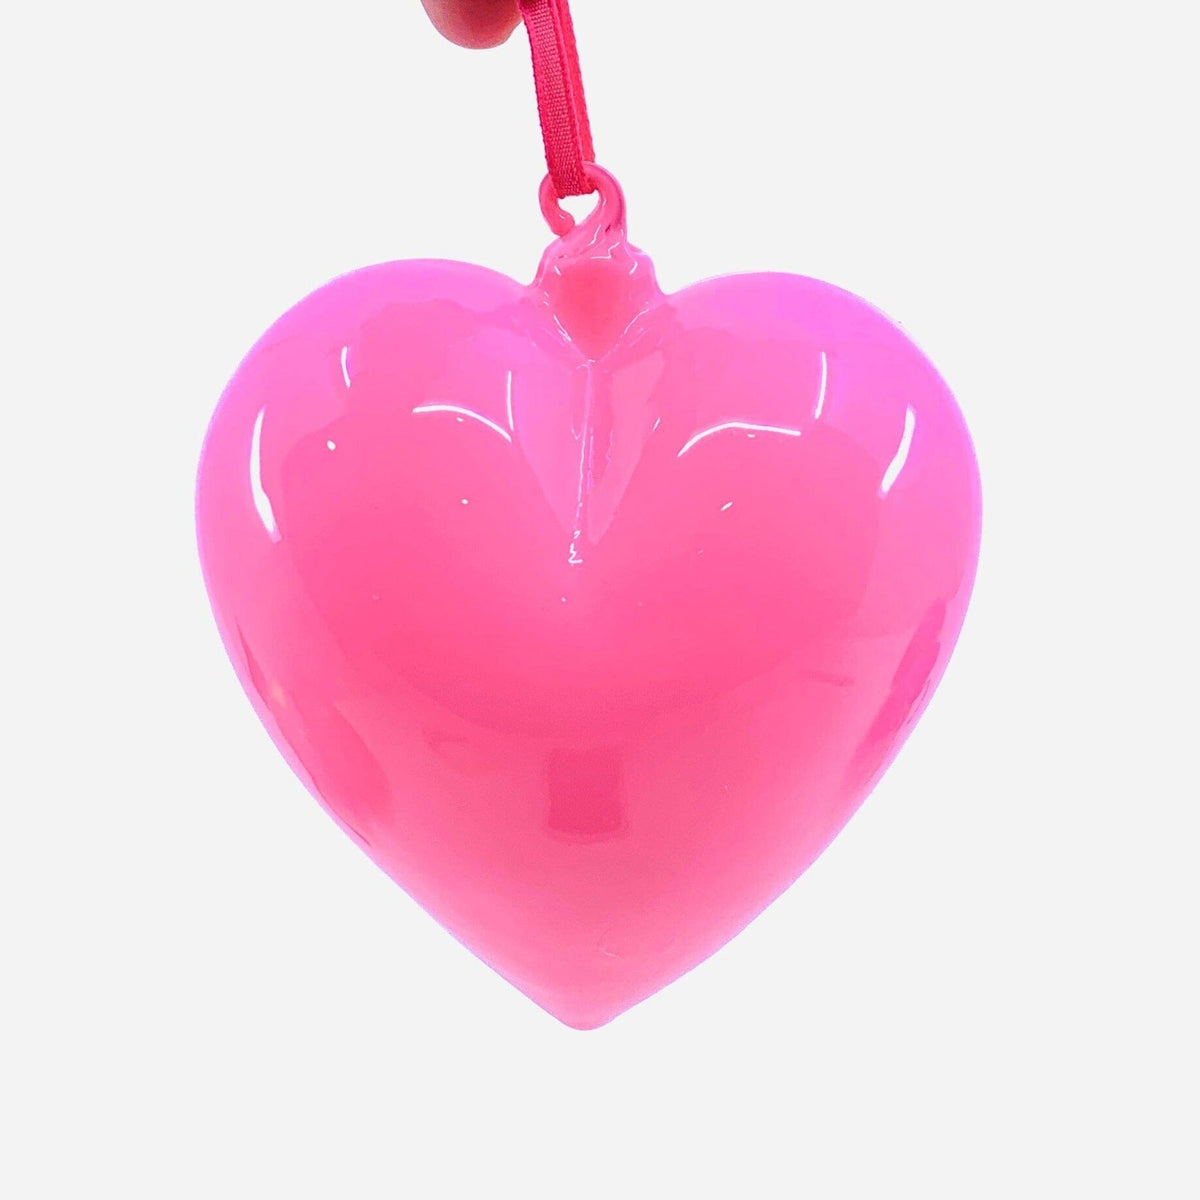 Heart Ornament 48 Ornament One Hundred 80 Degrees Pink 5 